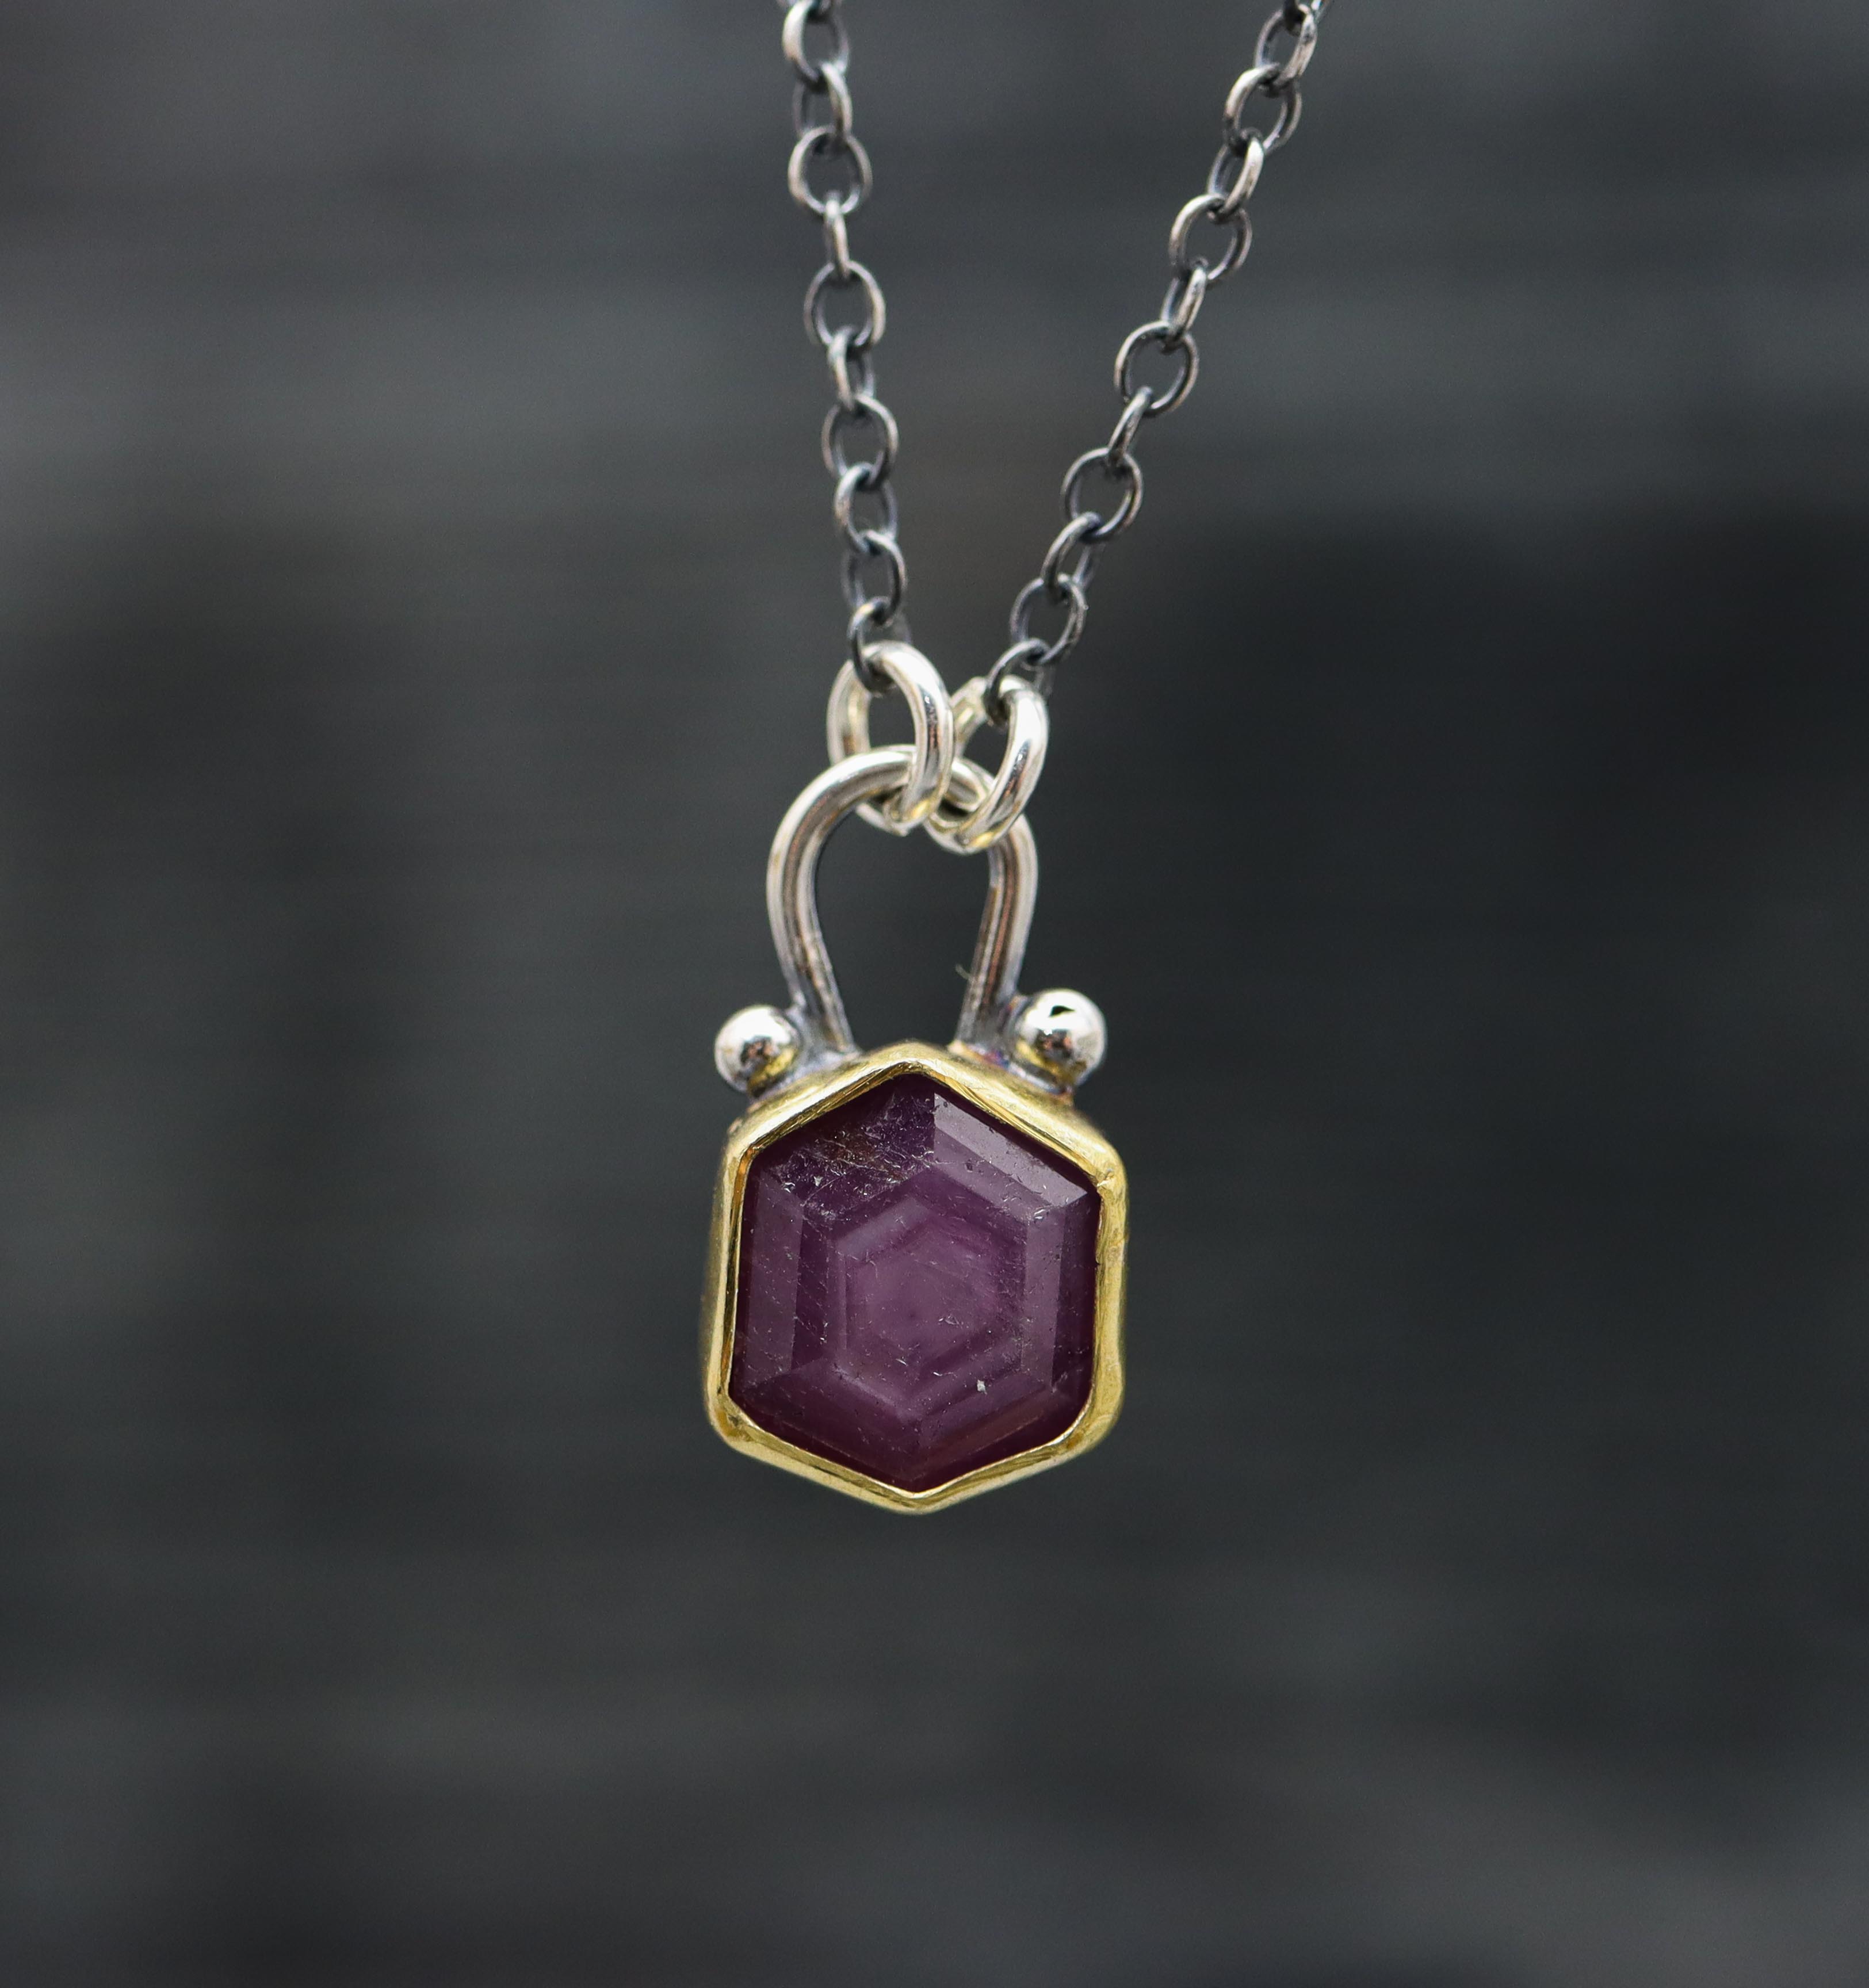 Ruby Pendant Necklace Sterling Silver and 22k Gold